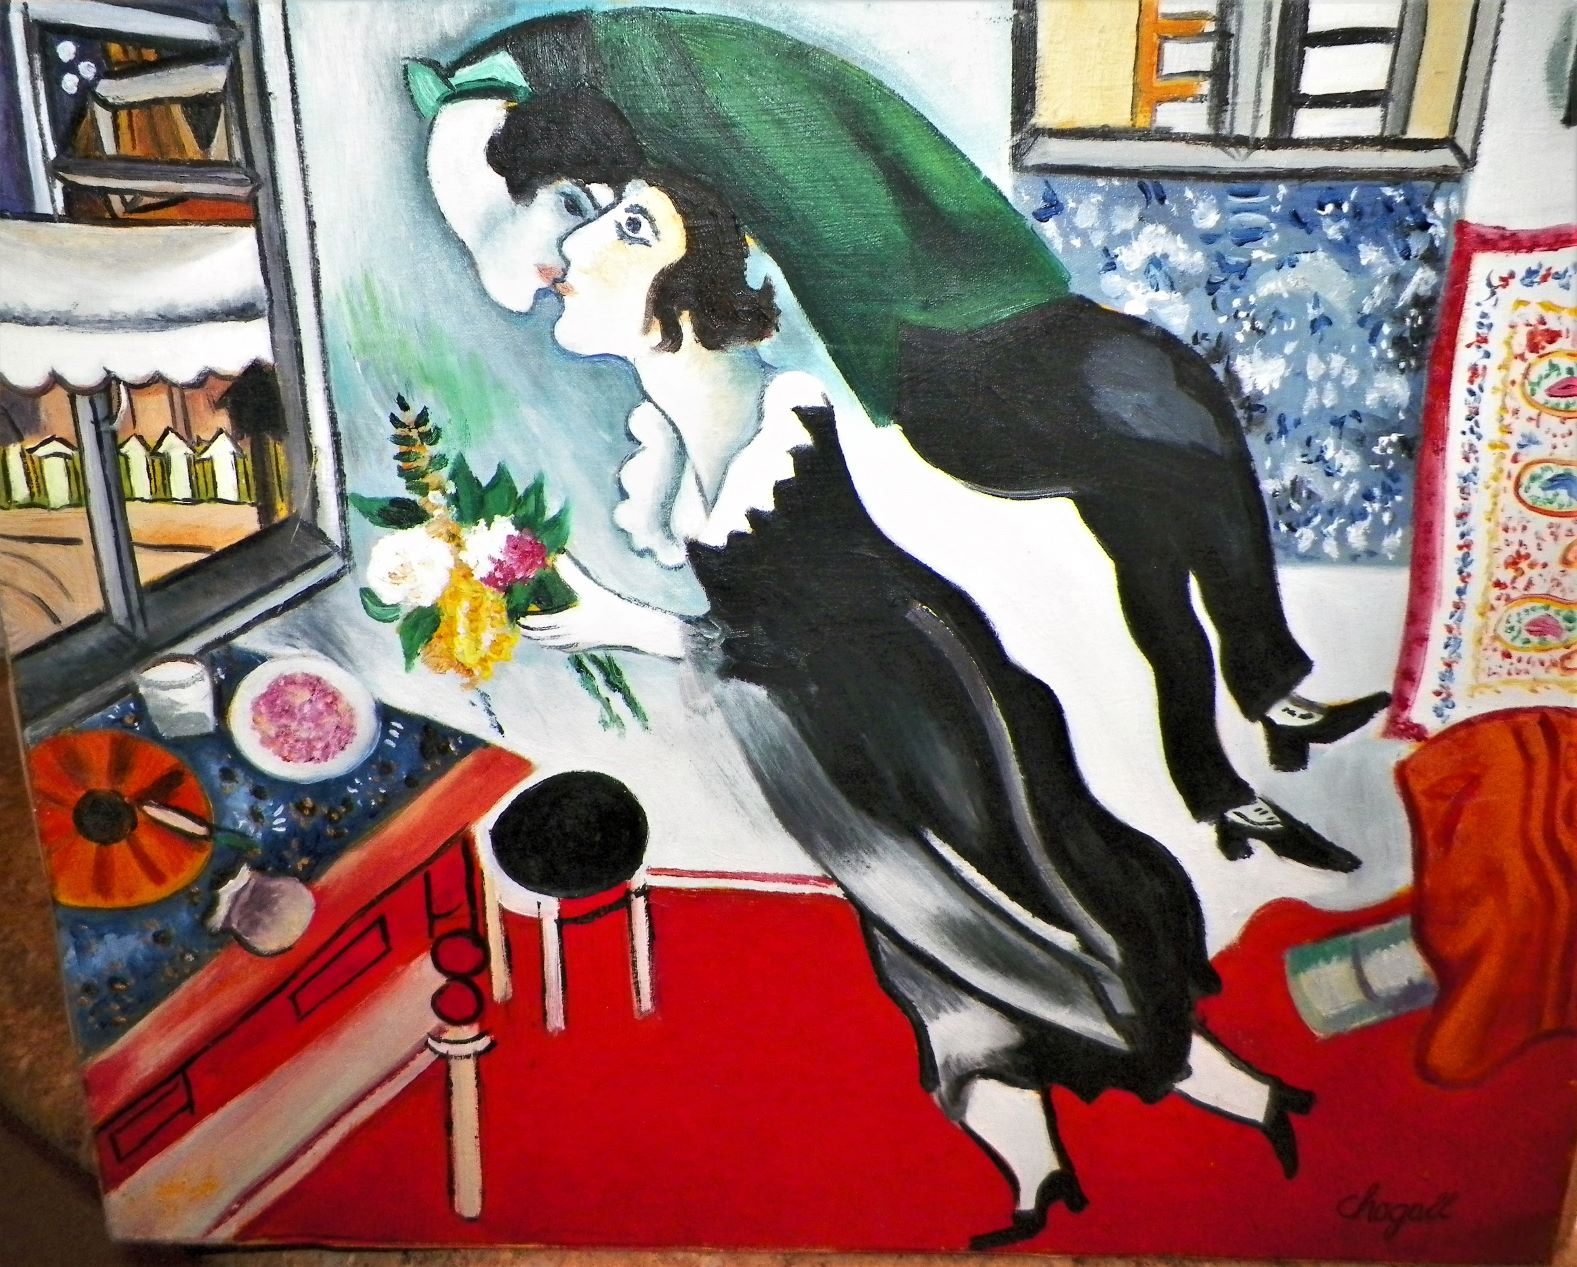 ART PAINTING CHAGALL SIGNED THRIFT STORE FIND 2AA.JPG